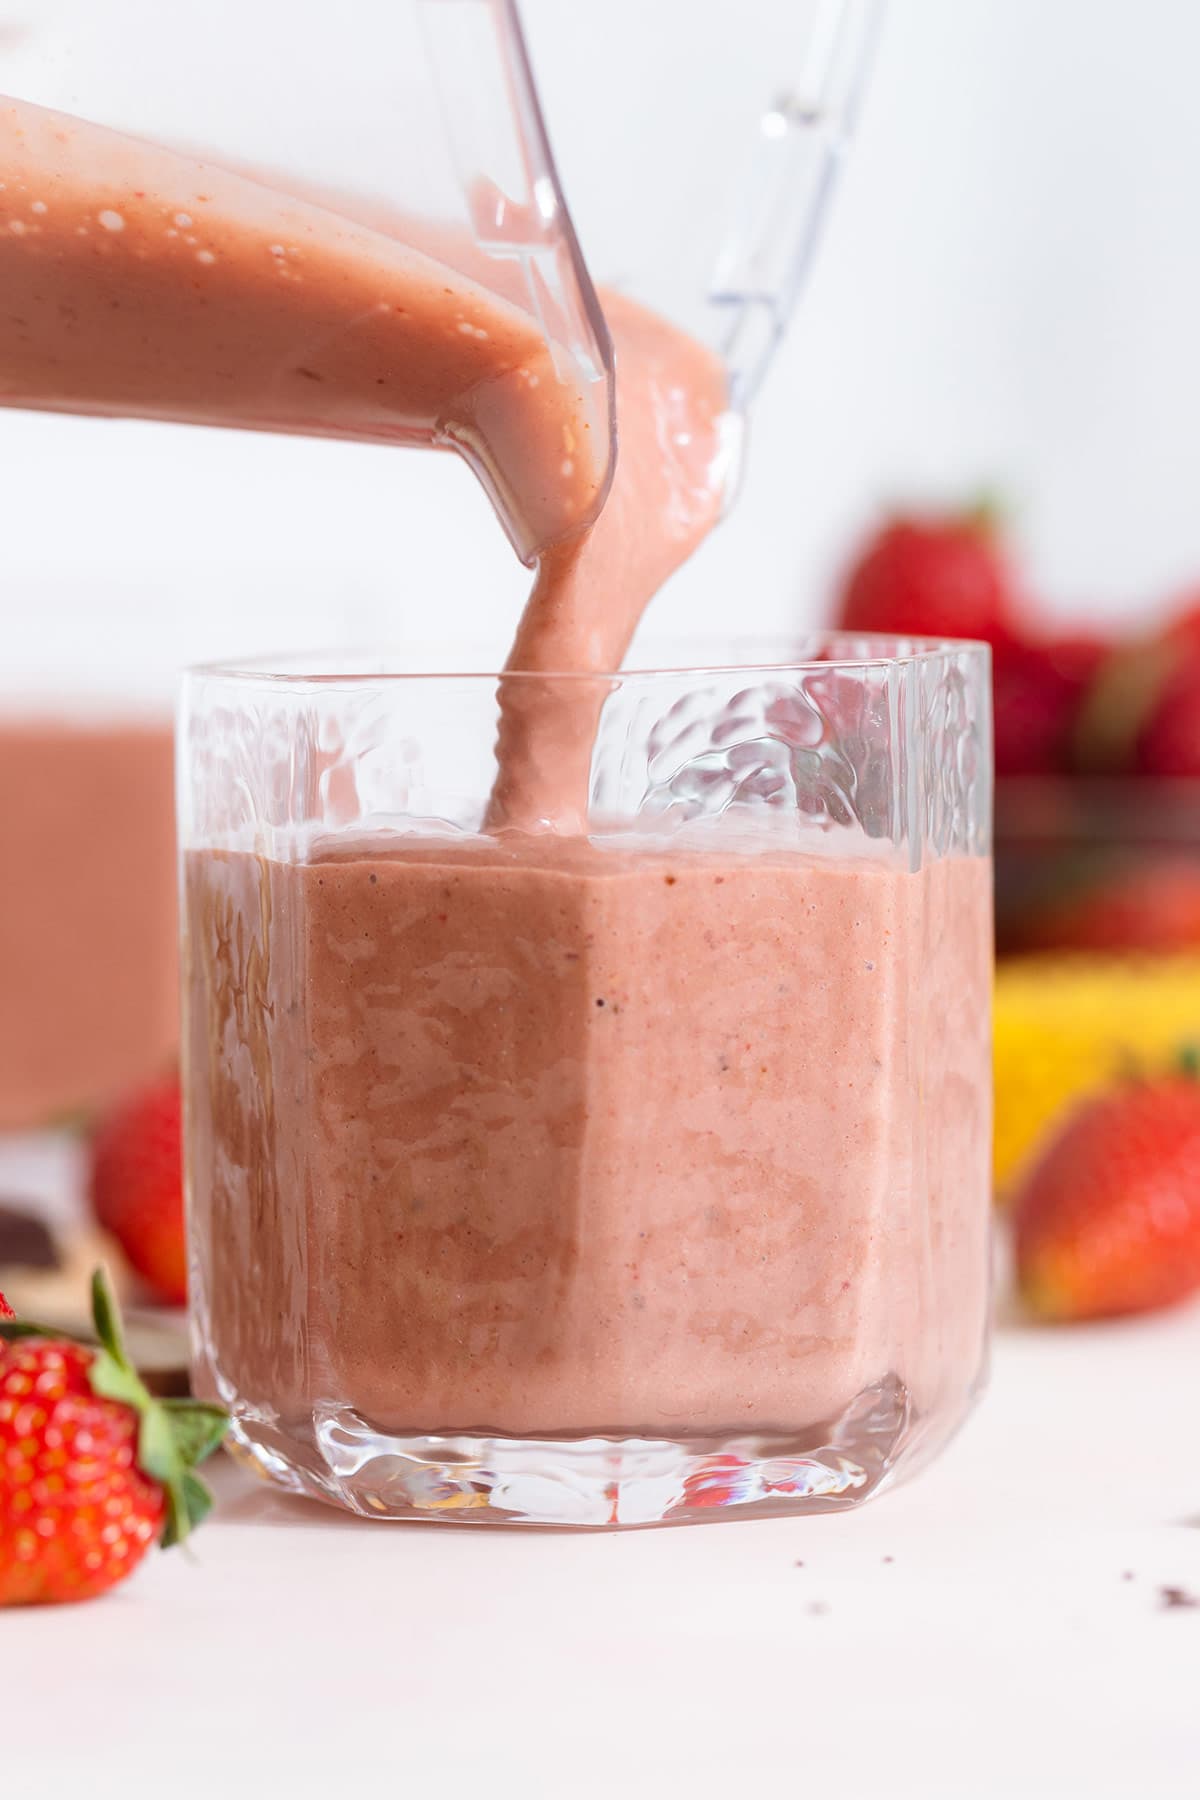 Strawberry smoothie being poured into a short glass on a white background.